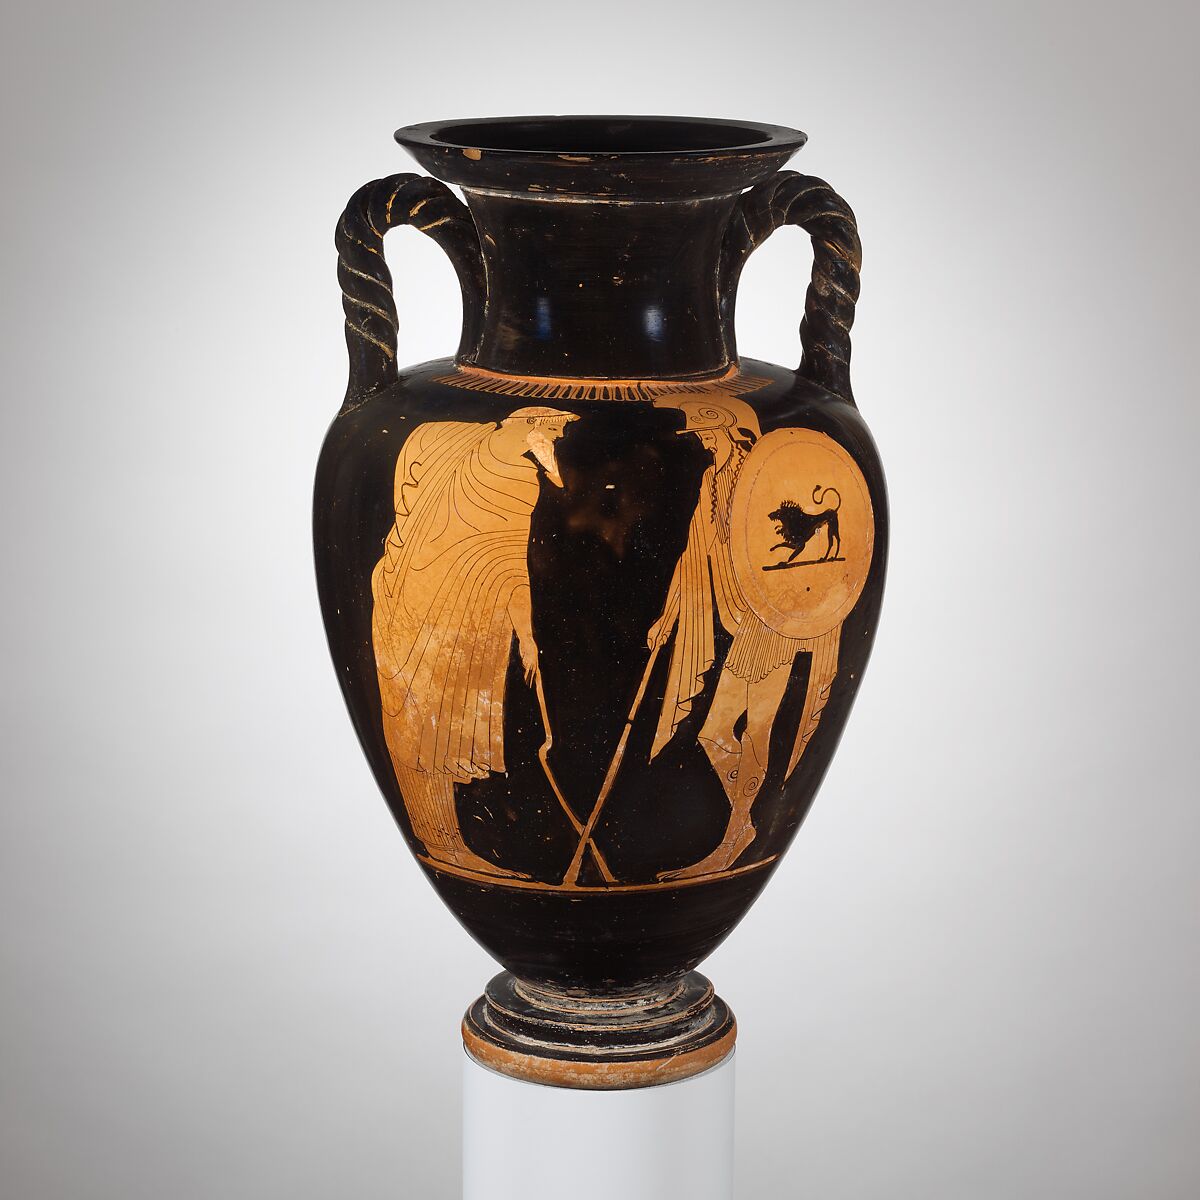 Terracotta neck-amphora (jar) with twisted handles, Attributed to the Matsch Painter, Terracotta, Greek, Attic 